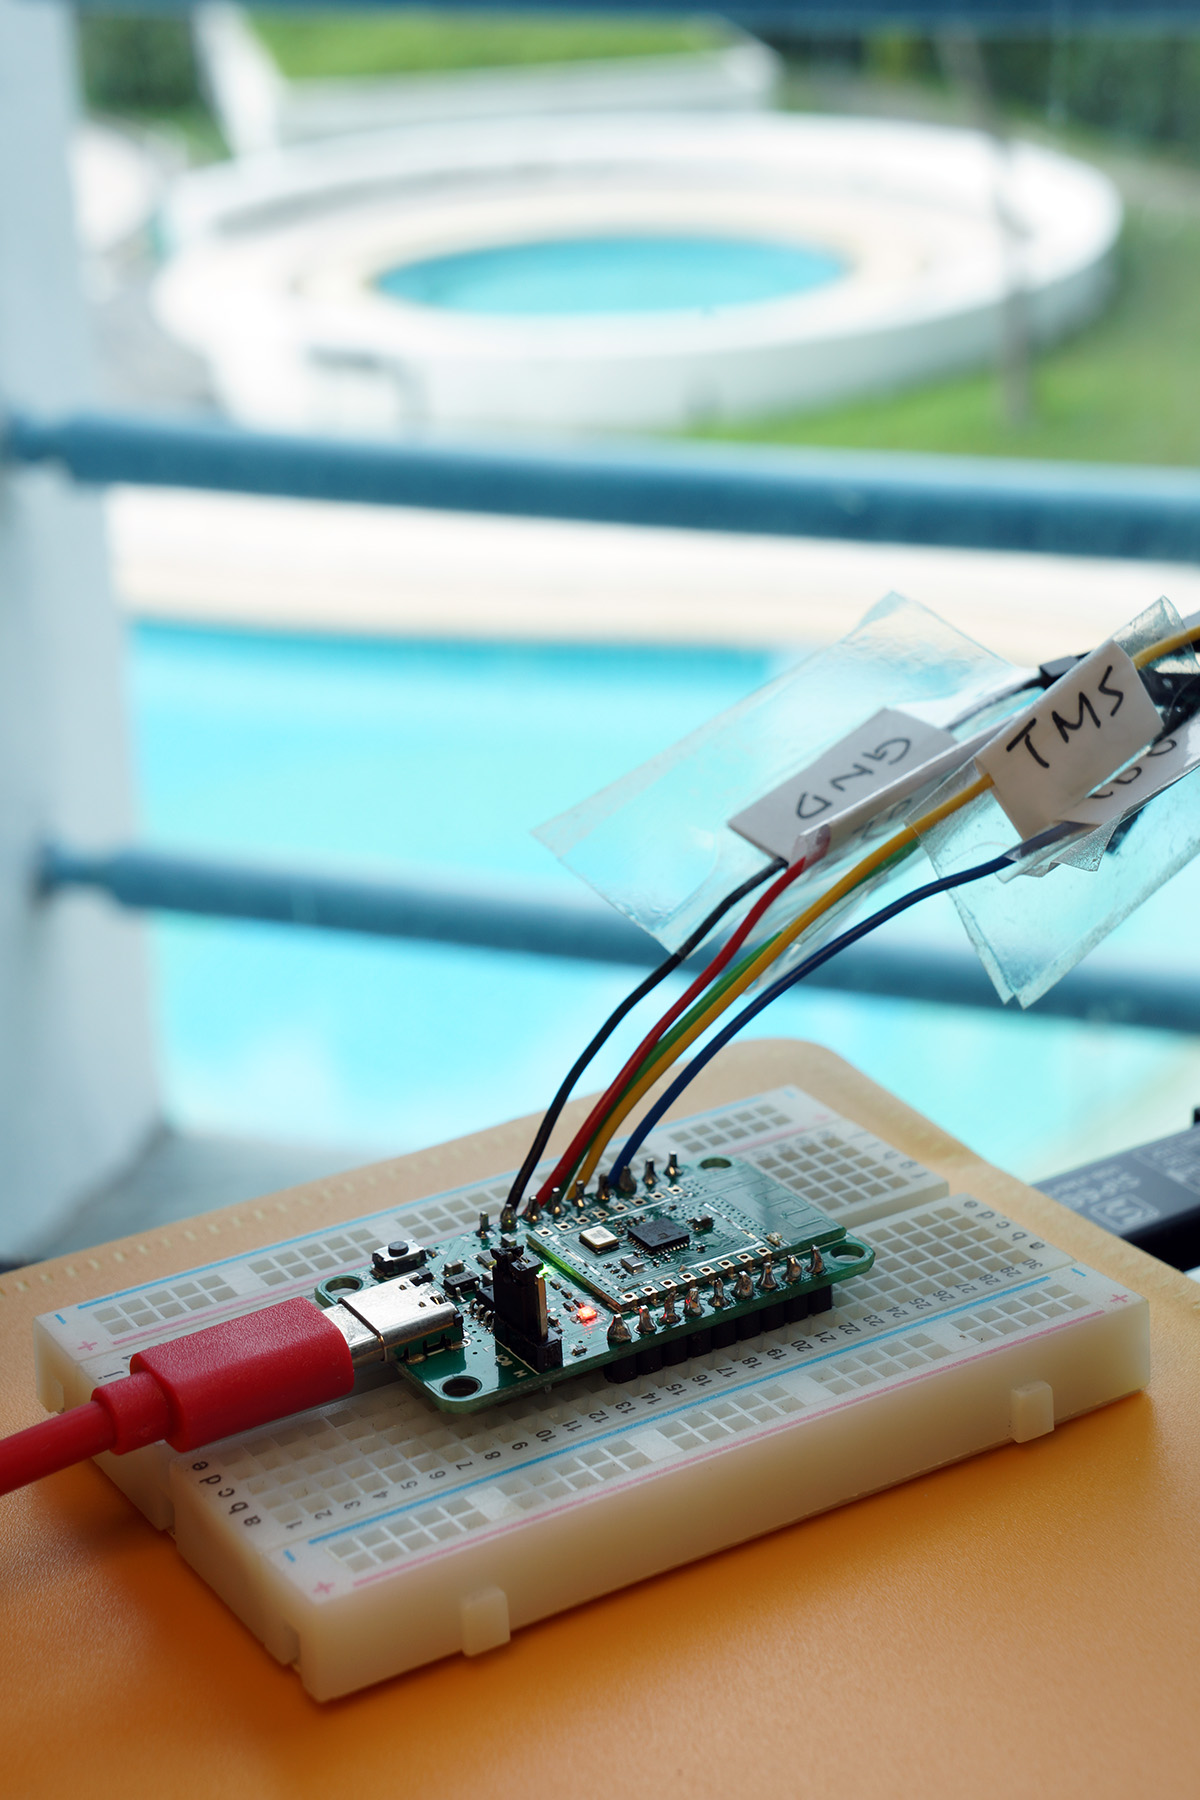 Poolside Debugging with PineCone BL602 RISC-V Evaluation Board